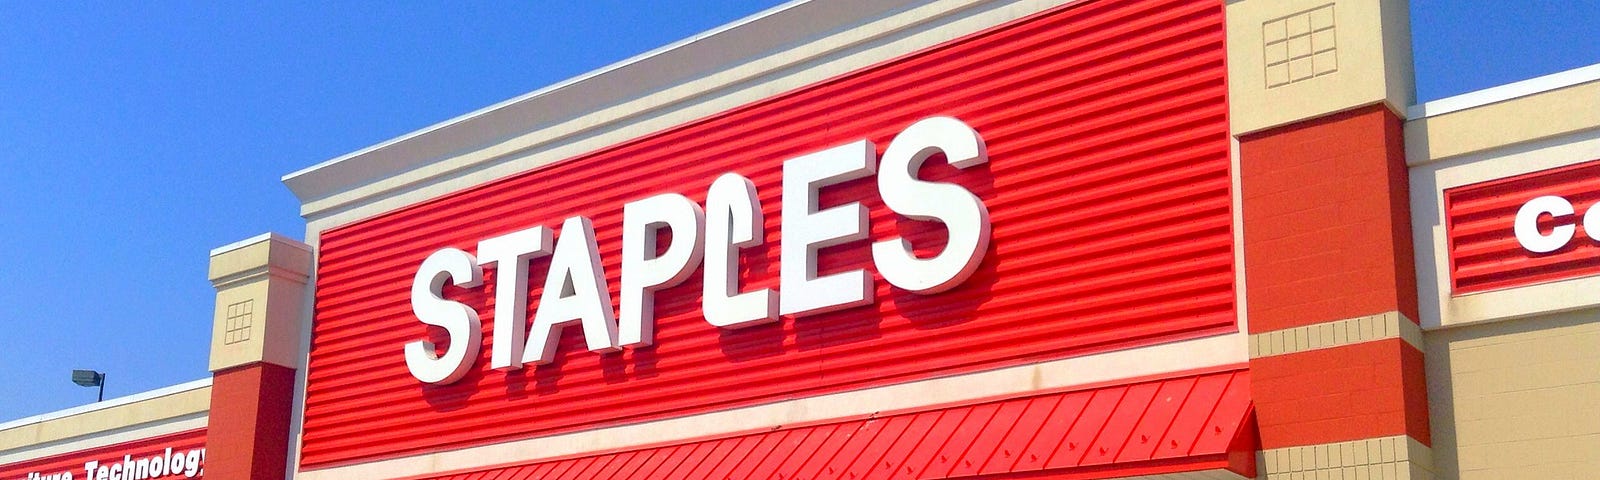 A Staples office supply store storefront